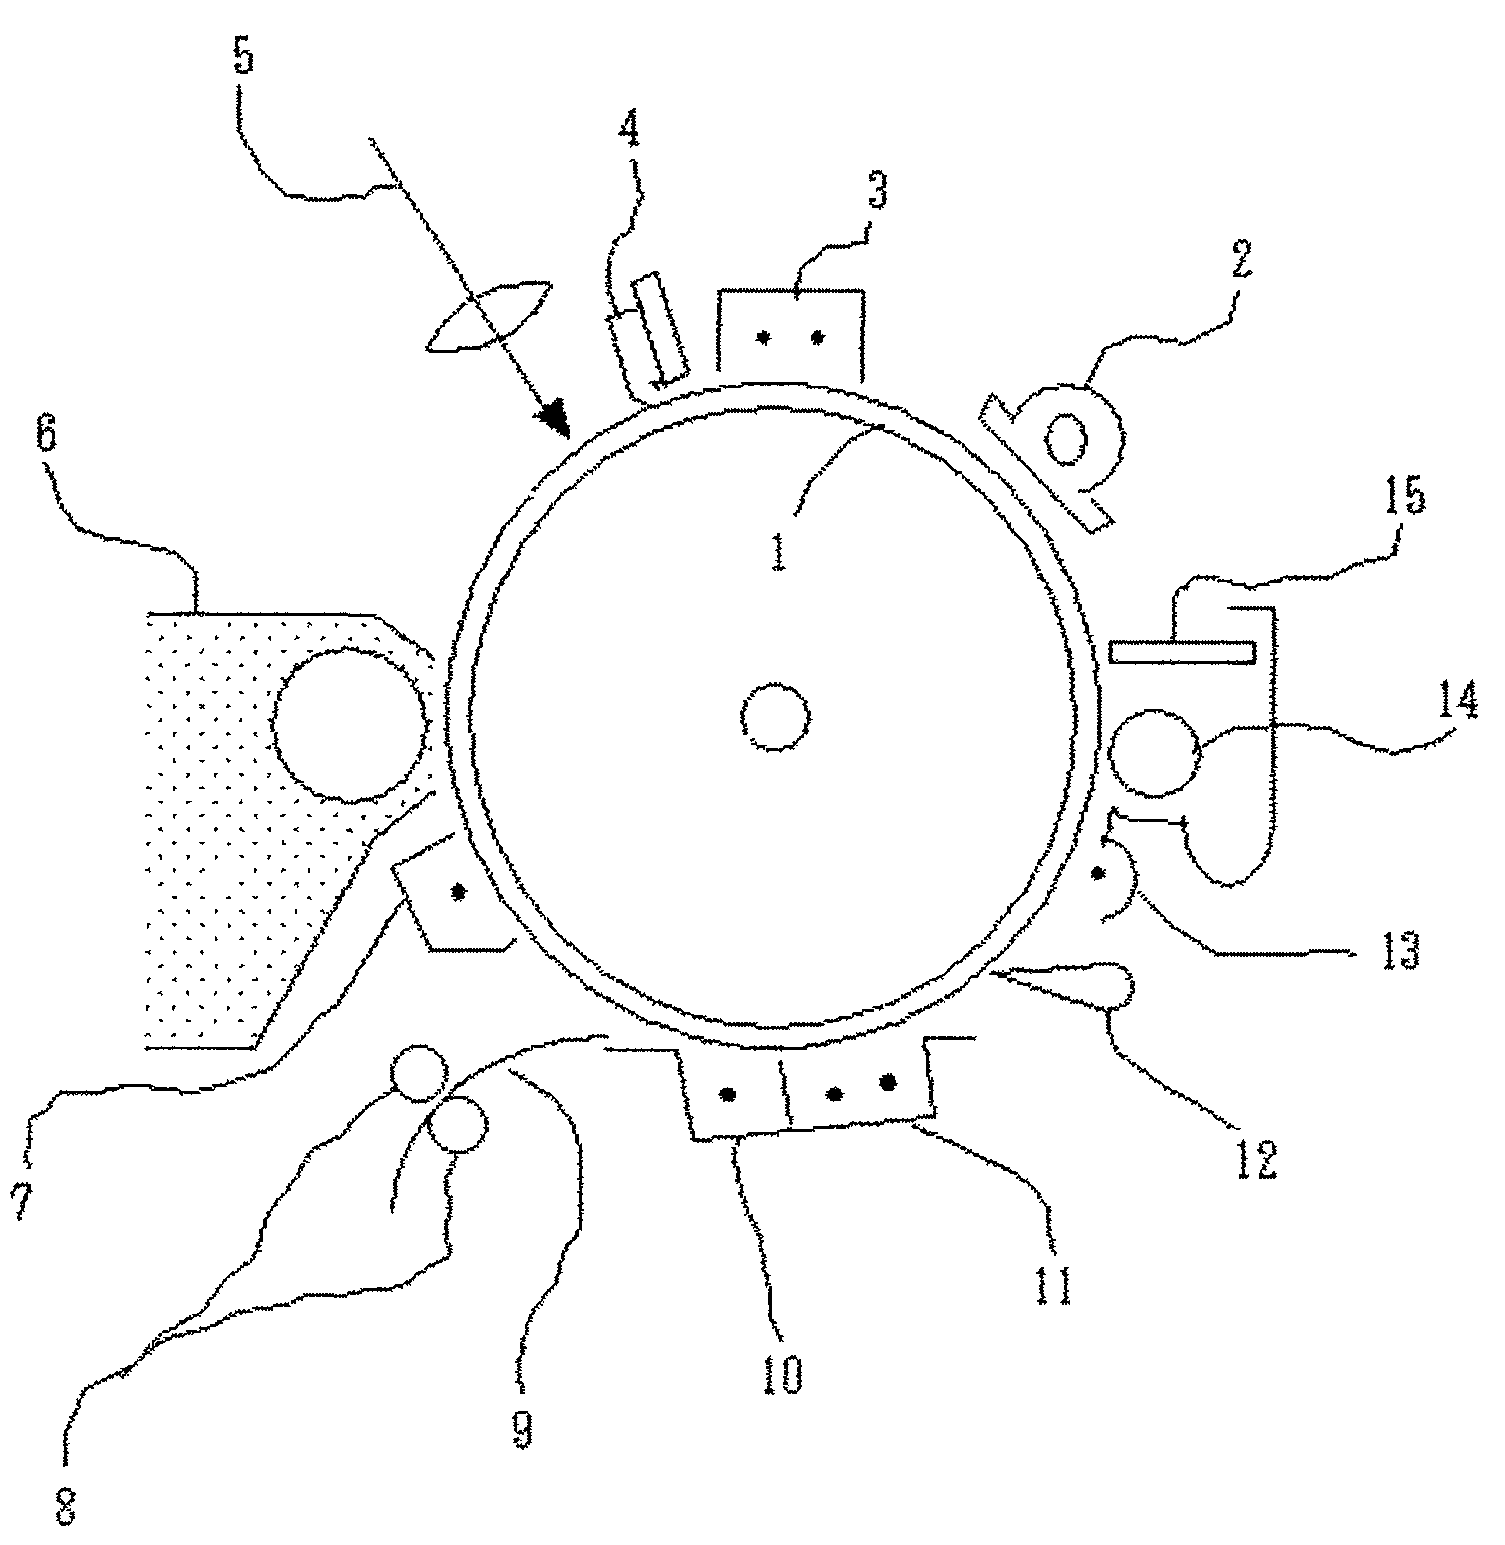 Naphthalenetetracarboxylic acid diimide derivative and electrophotographic photoconductor having the same